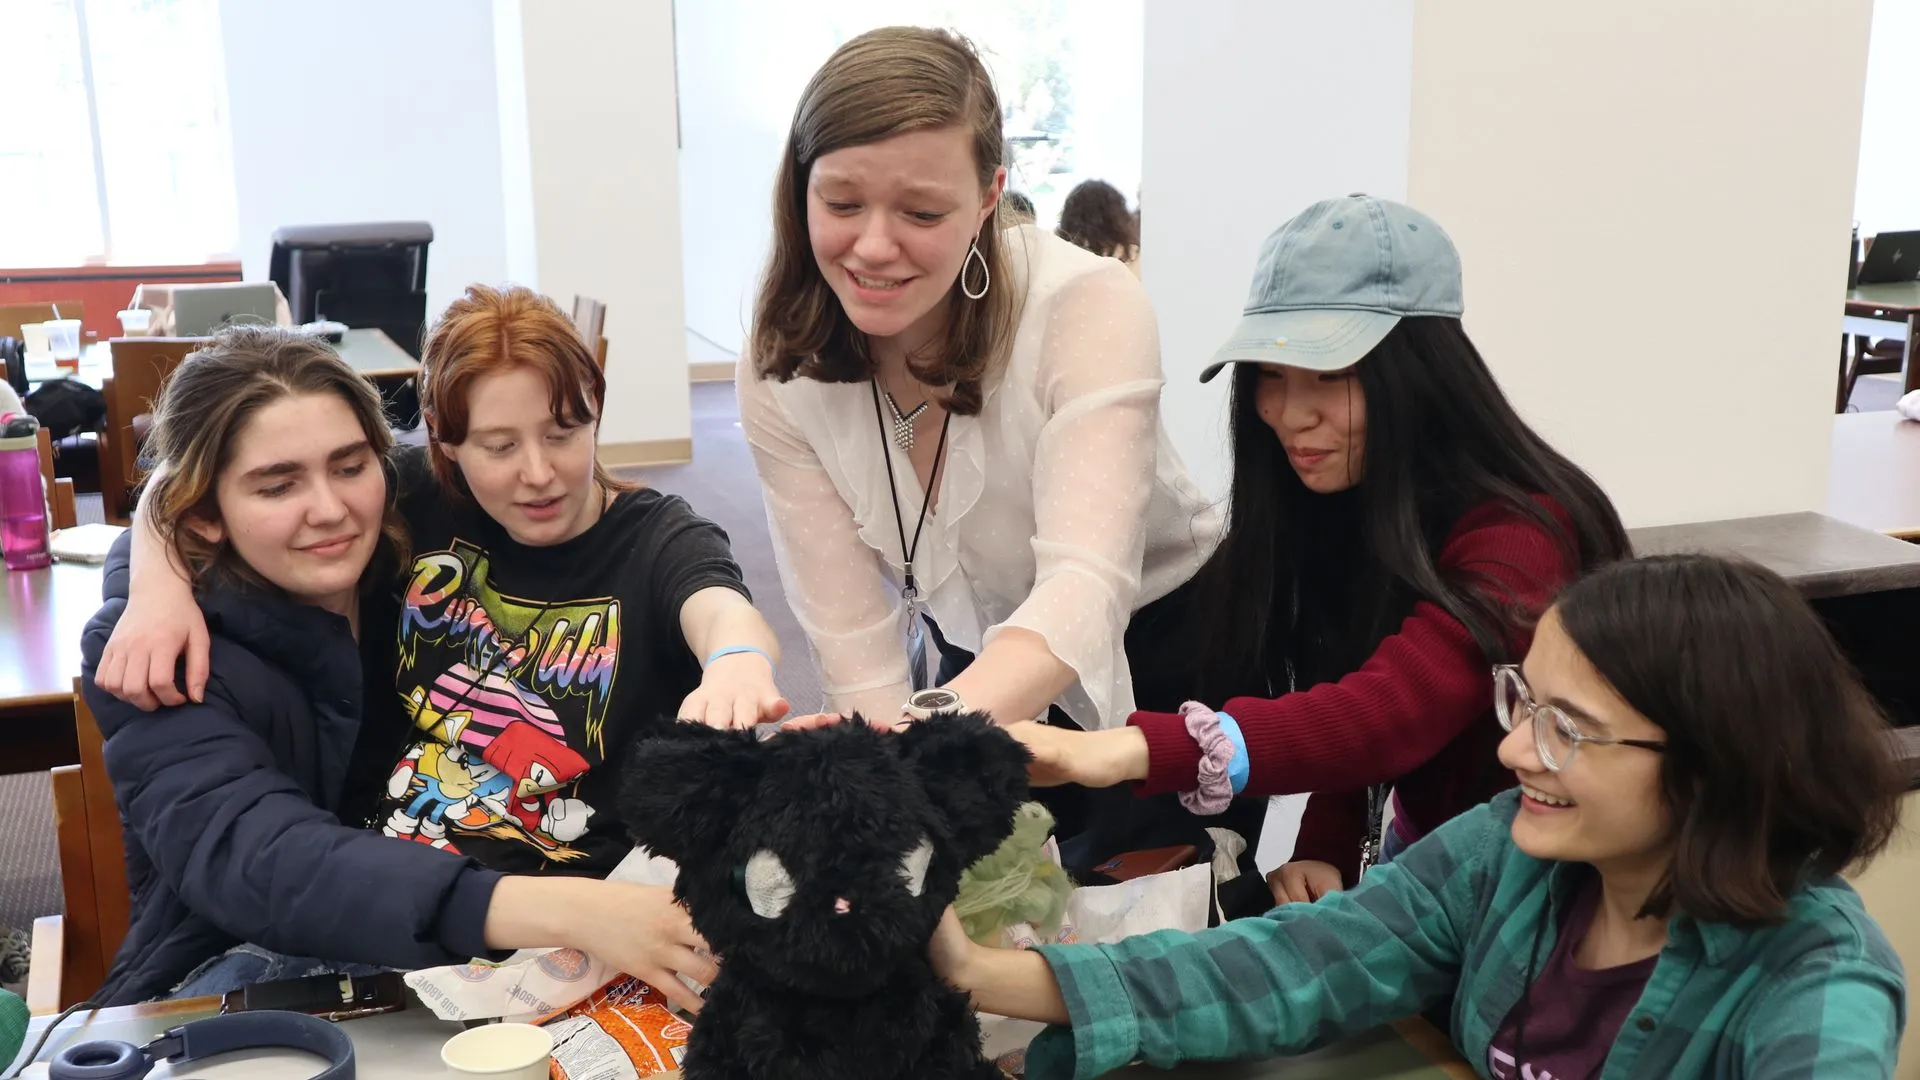 Five people smiling and petting a stuffed robot cat